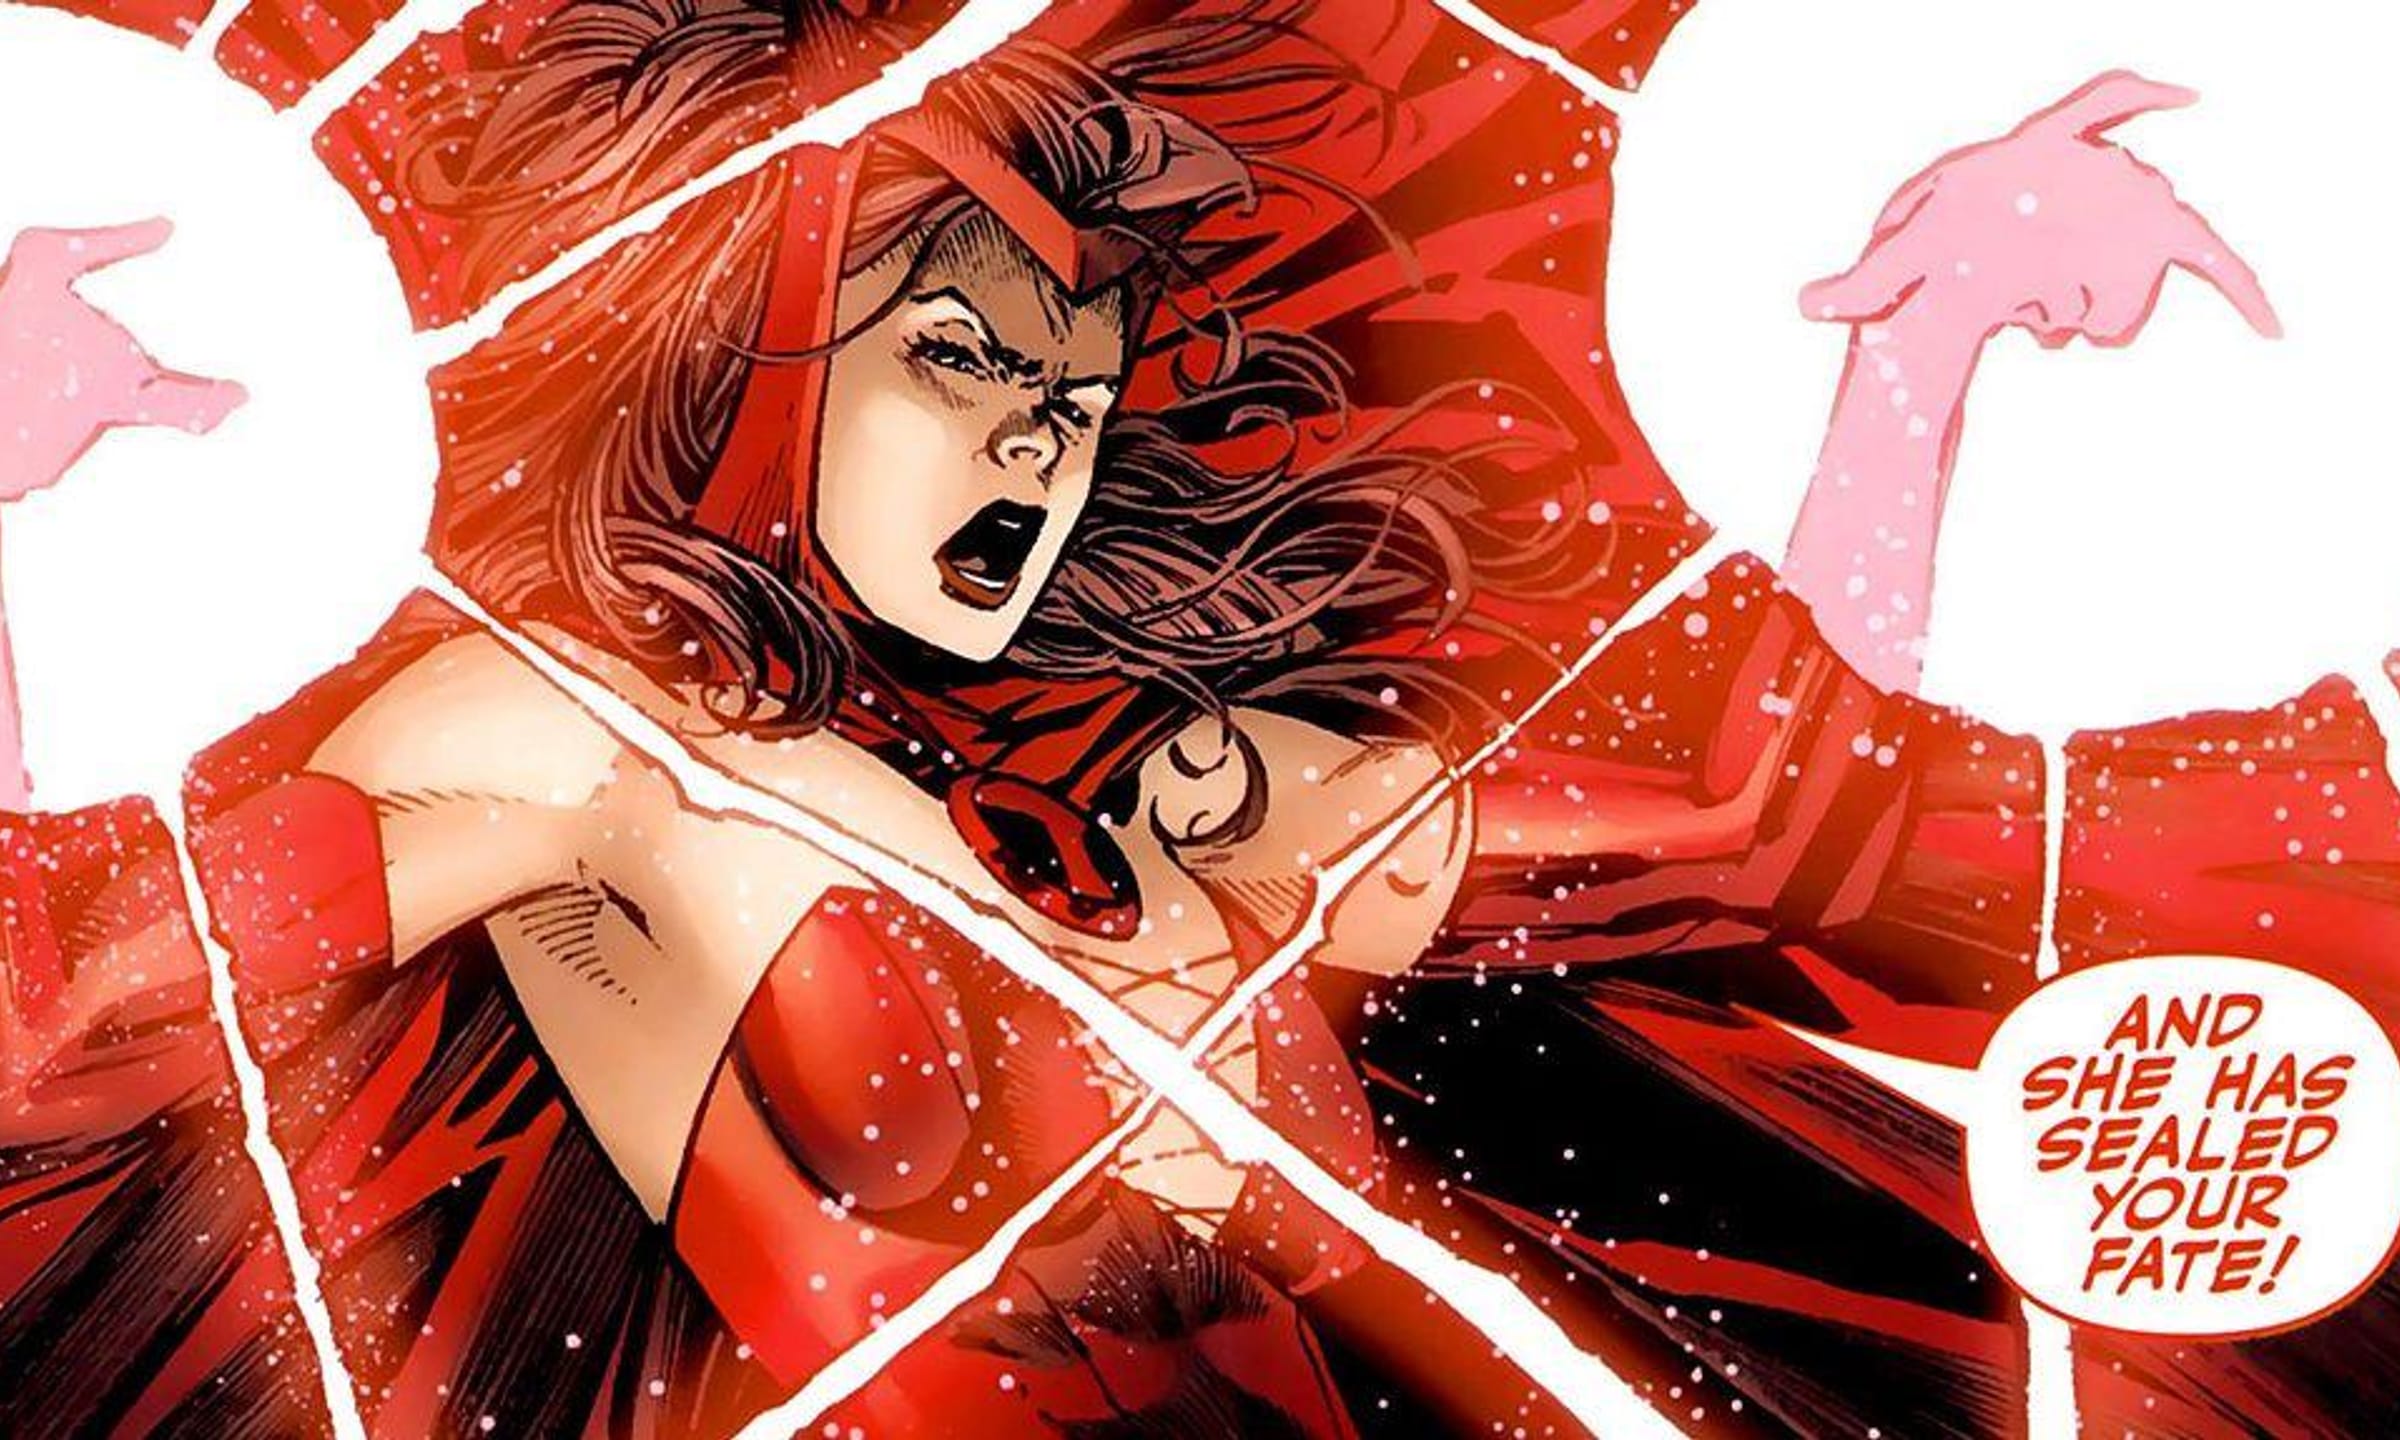 11 Of The Craziest Things Scarlet Witch Has Ever Done